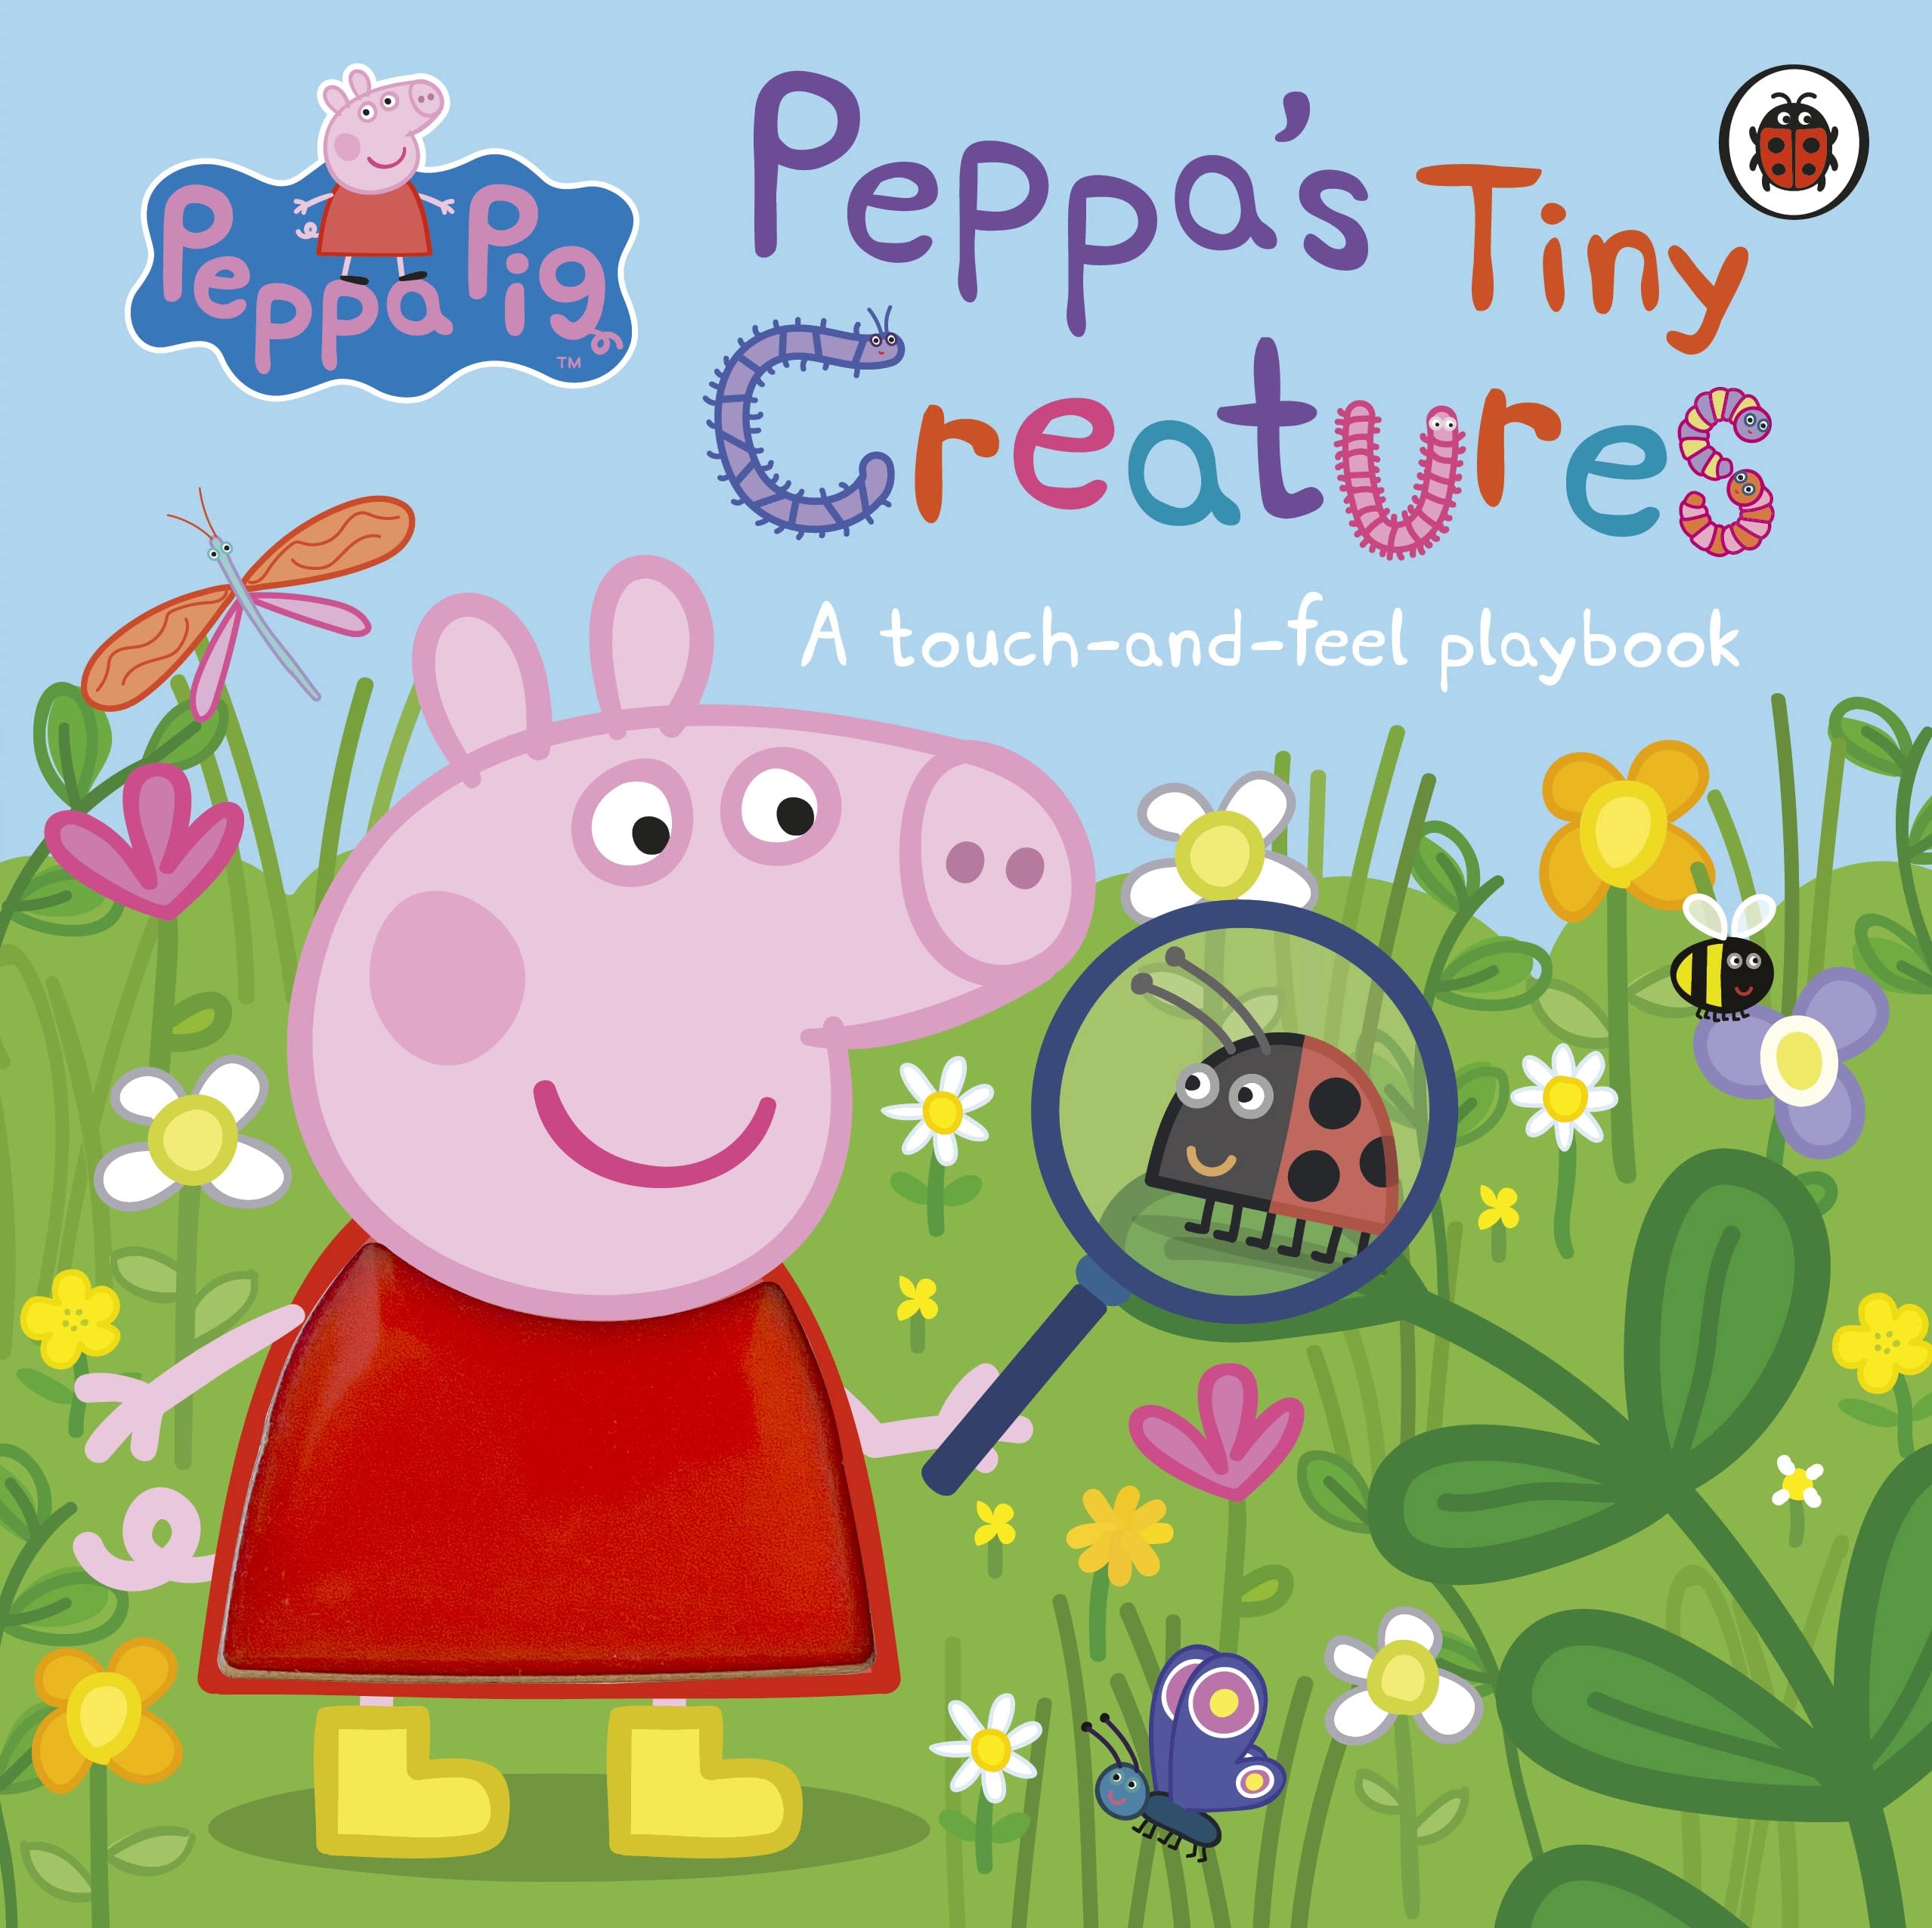 Peppa Pig: Peppas Tiny Creatures : A touch-and-feel playbook (Hardcover)